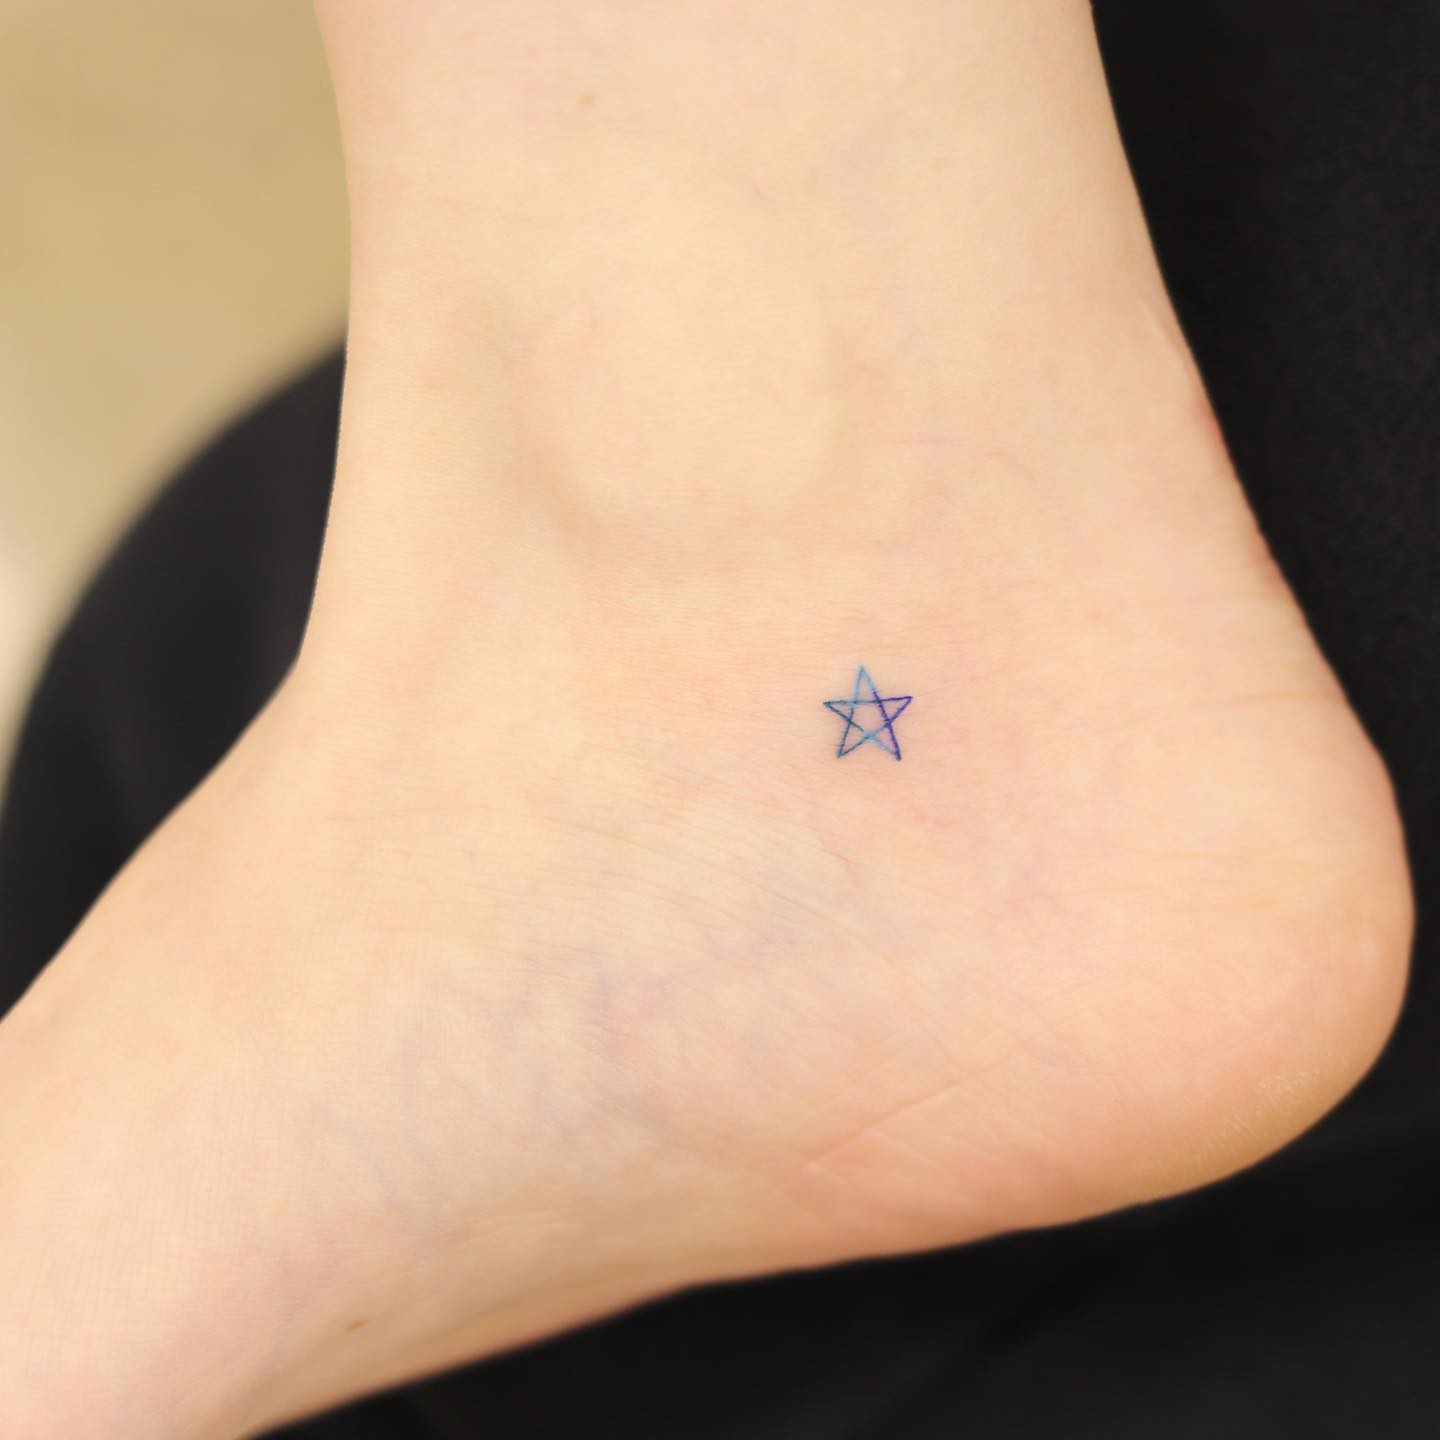 43 Simple Tattoos for Women Who Are Afraid to Commit  StayGlam